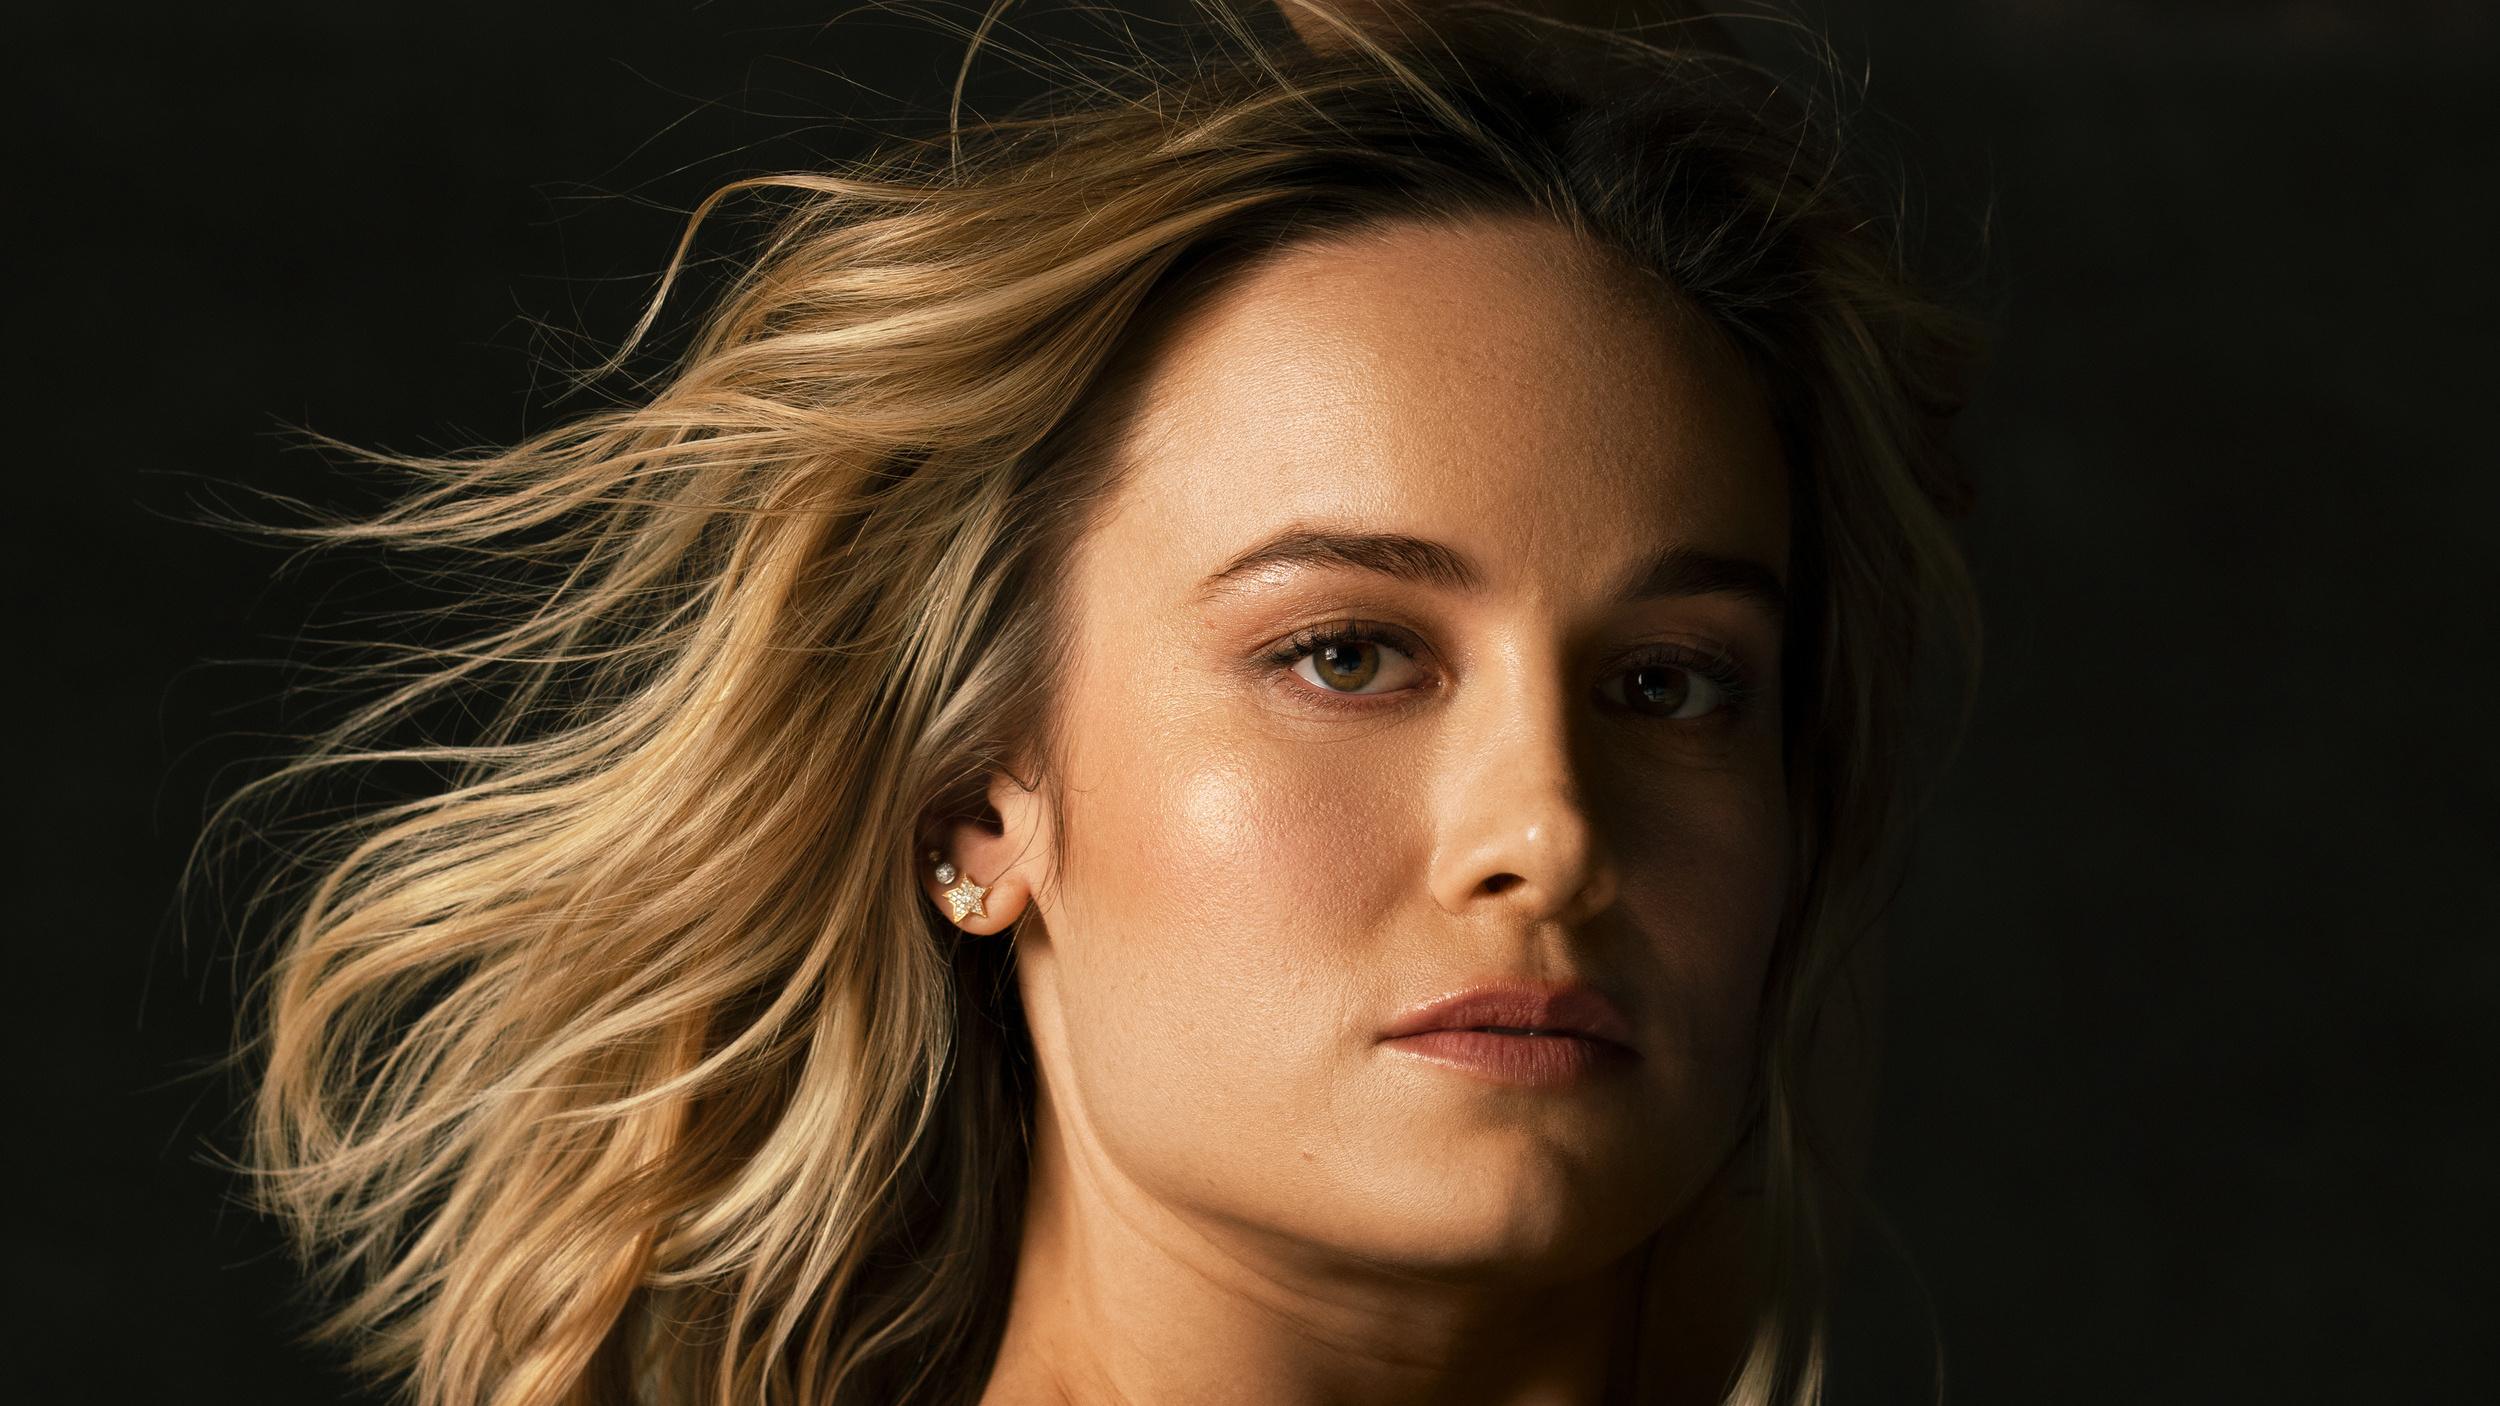 Brie Larson Movies, The Hollywood Reporter, Magazine shoot, Celeb wallpapers, 2500x1410 HD Desktop